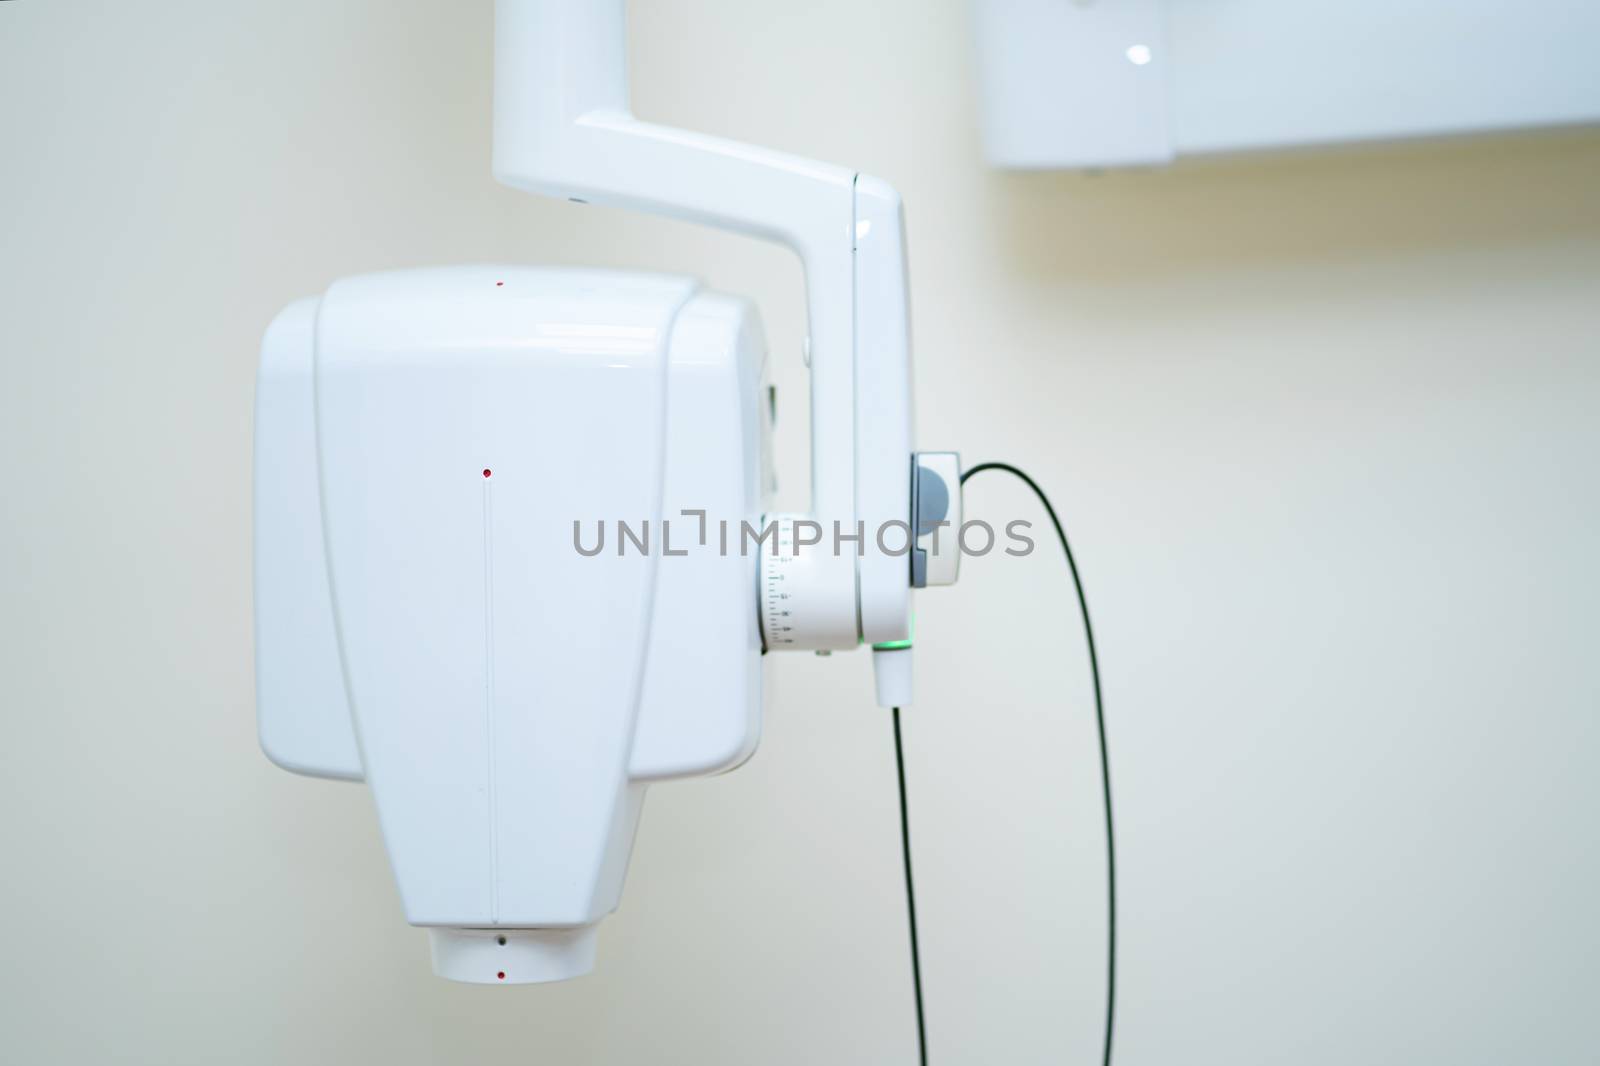 Professional dental device for local x-ray of teeth and jaw